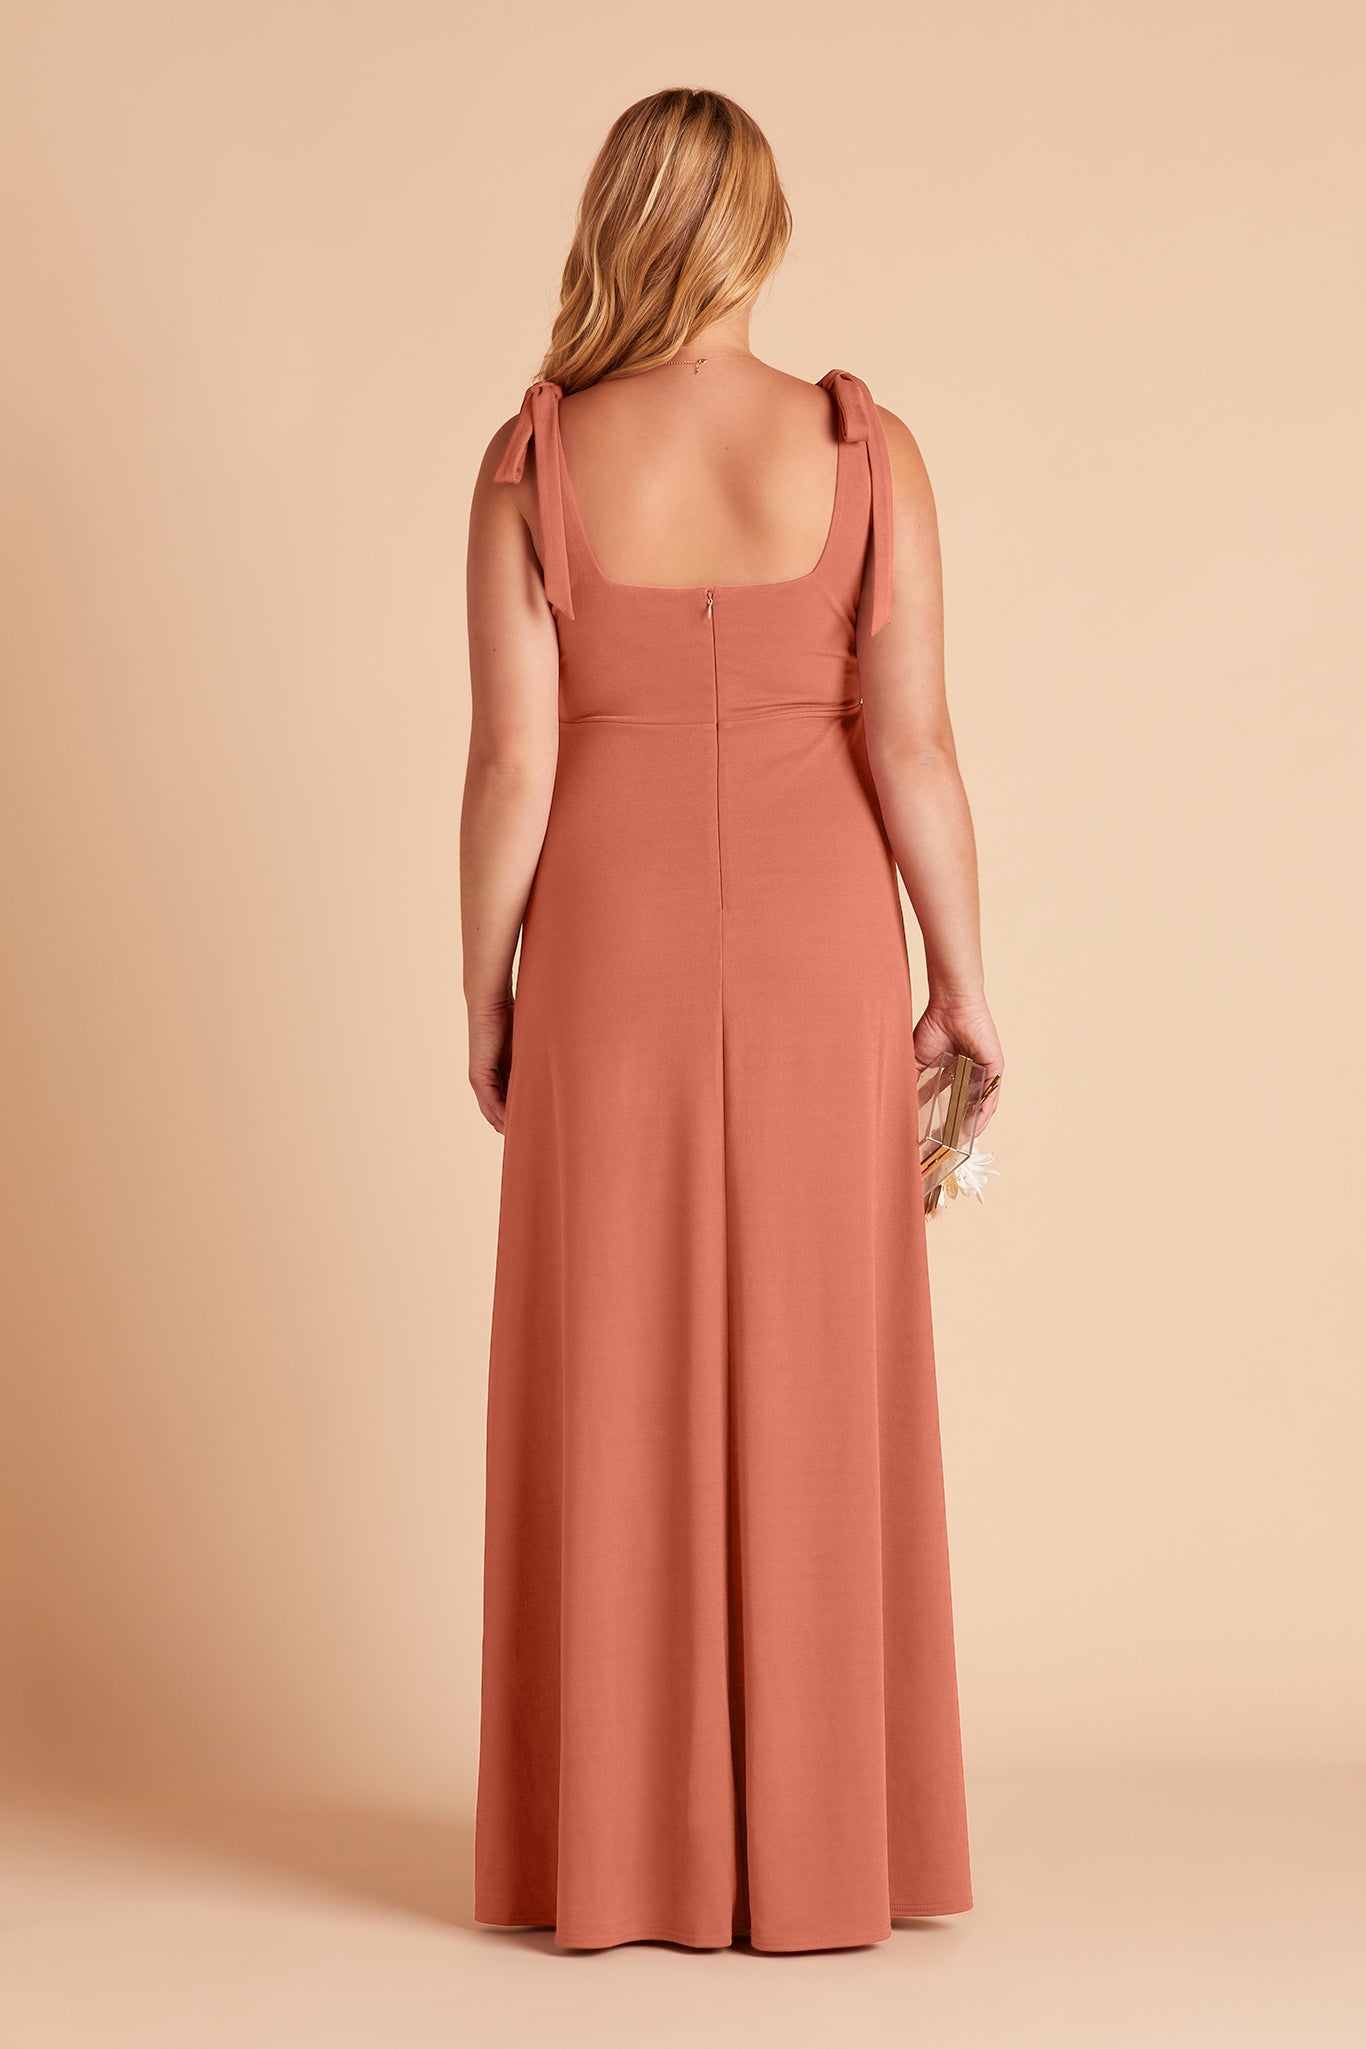 Alex plus size convertible bridesmaid dress with slit in terracotta crepe by Birdy Grey, back view